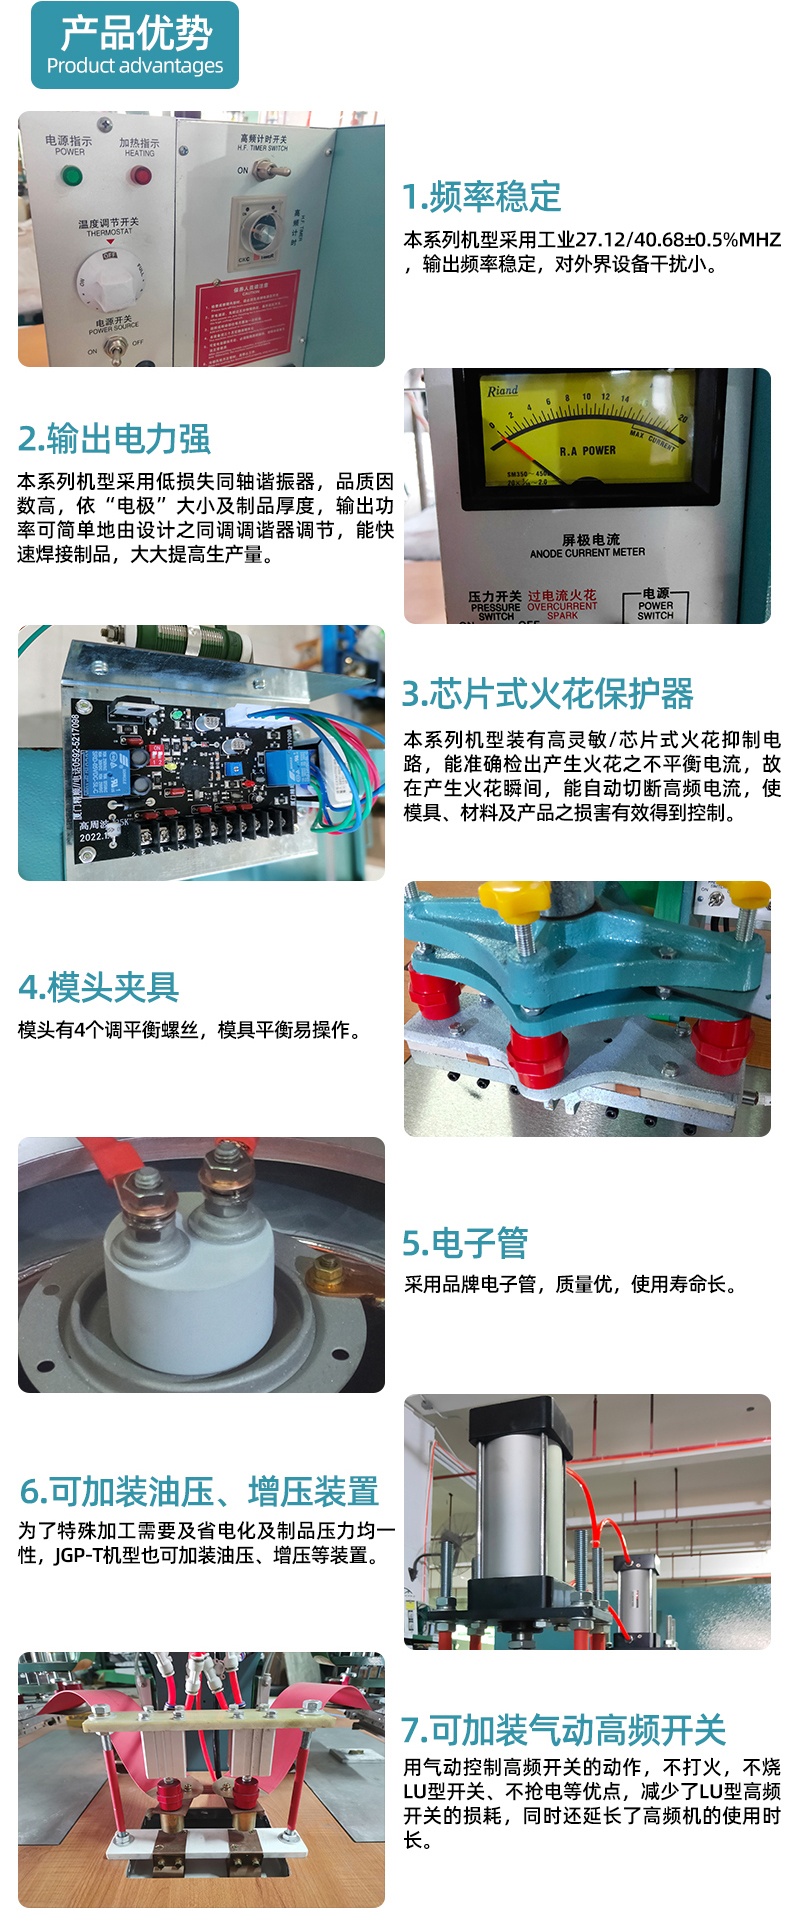 Double head high frequency plastic heat sealing machine, hot melting machine, high-frequency hot press, 3D embossing machine